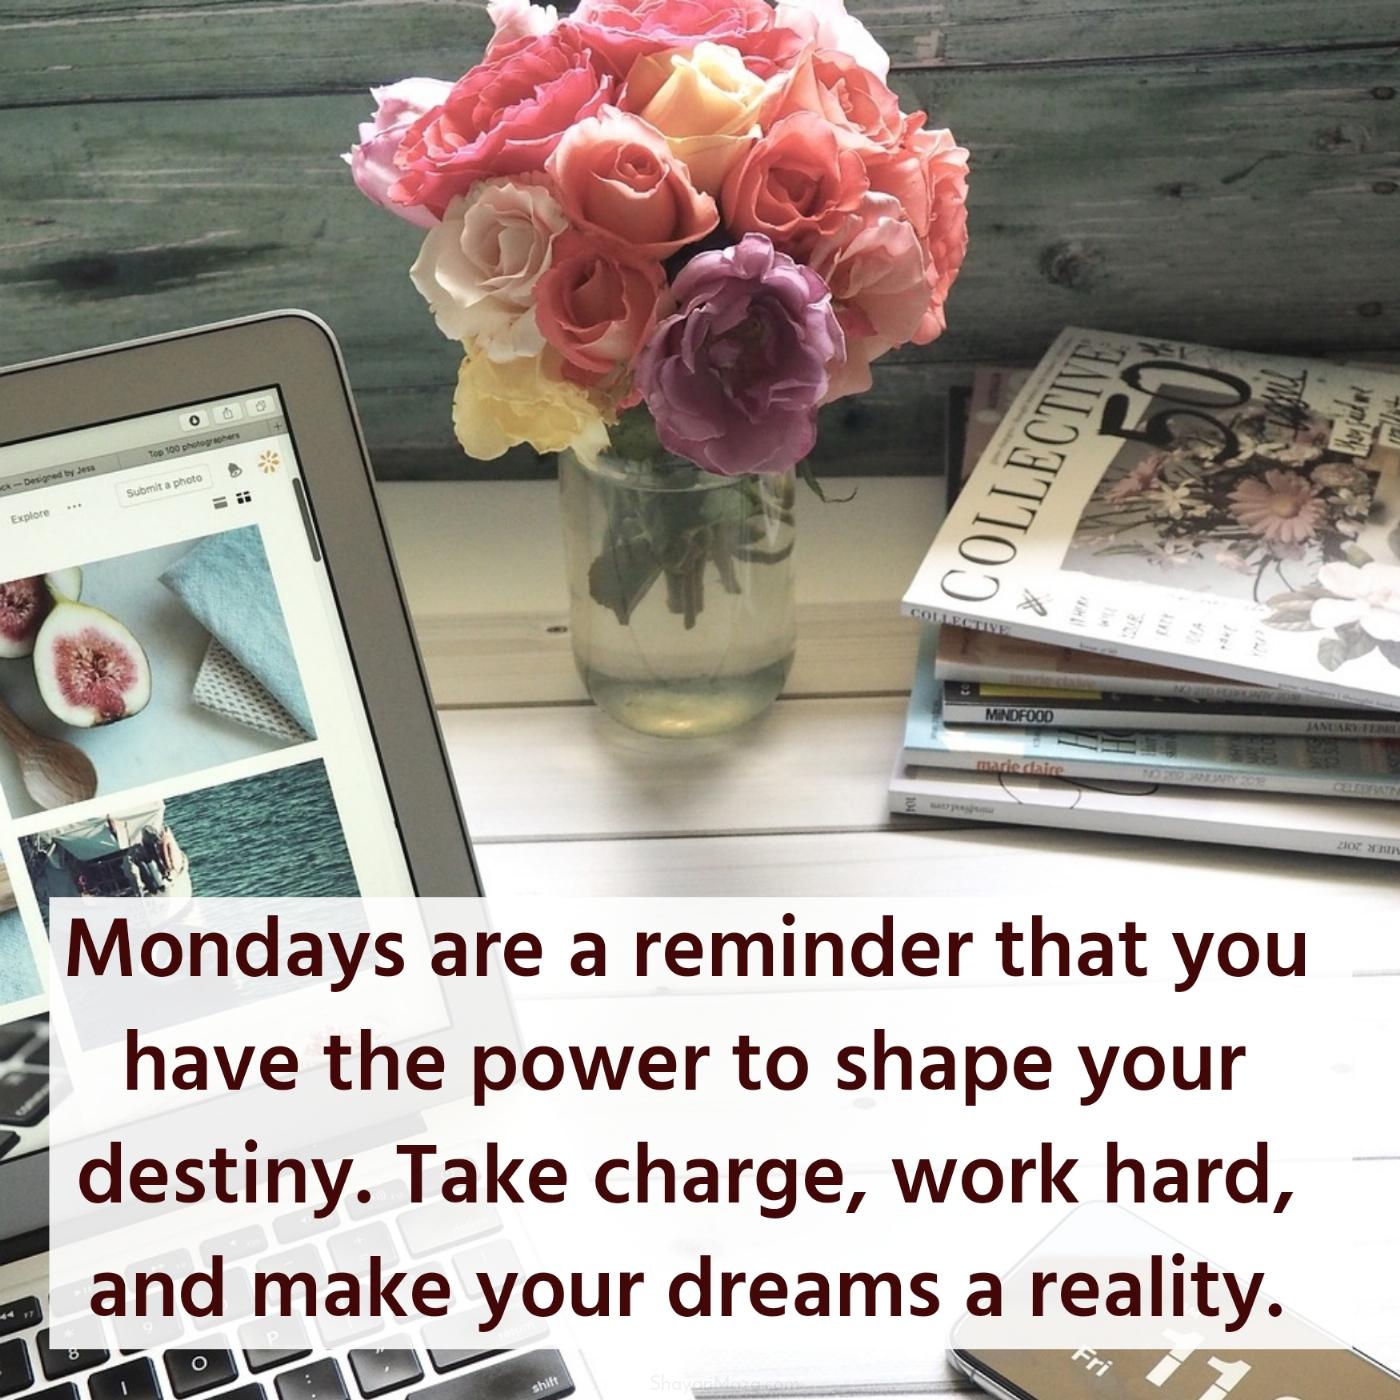 Mondays are a reminder that you have the power